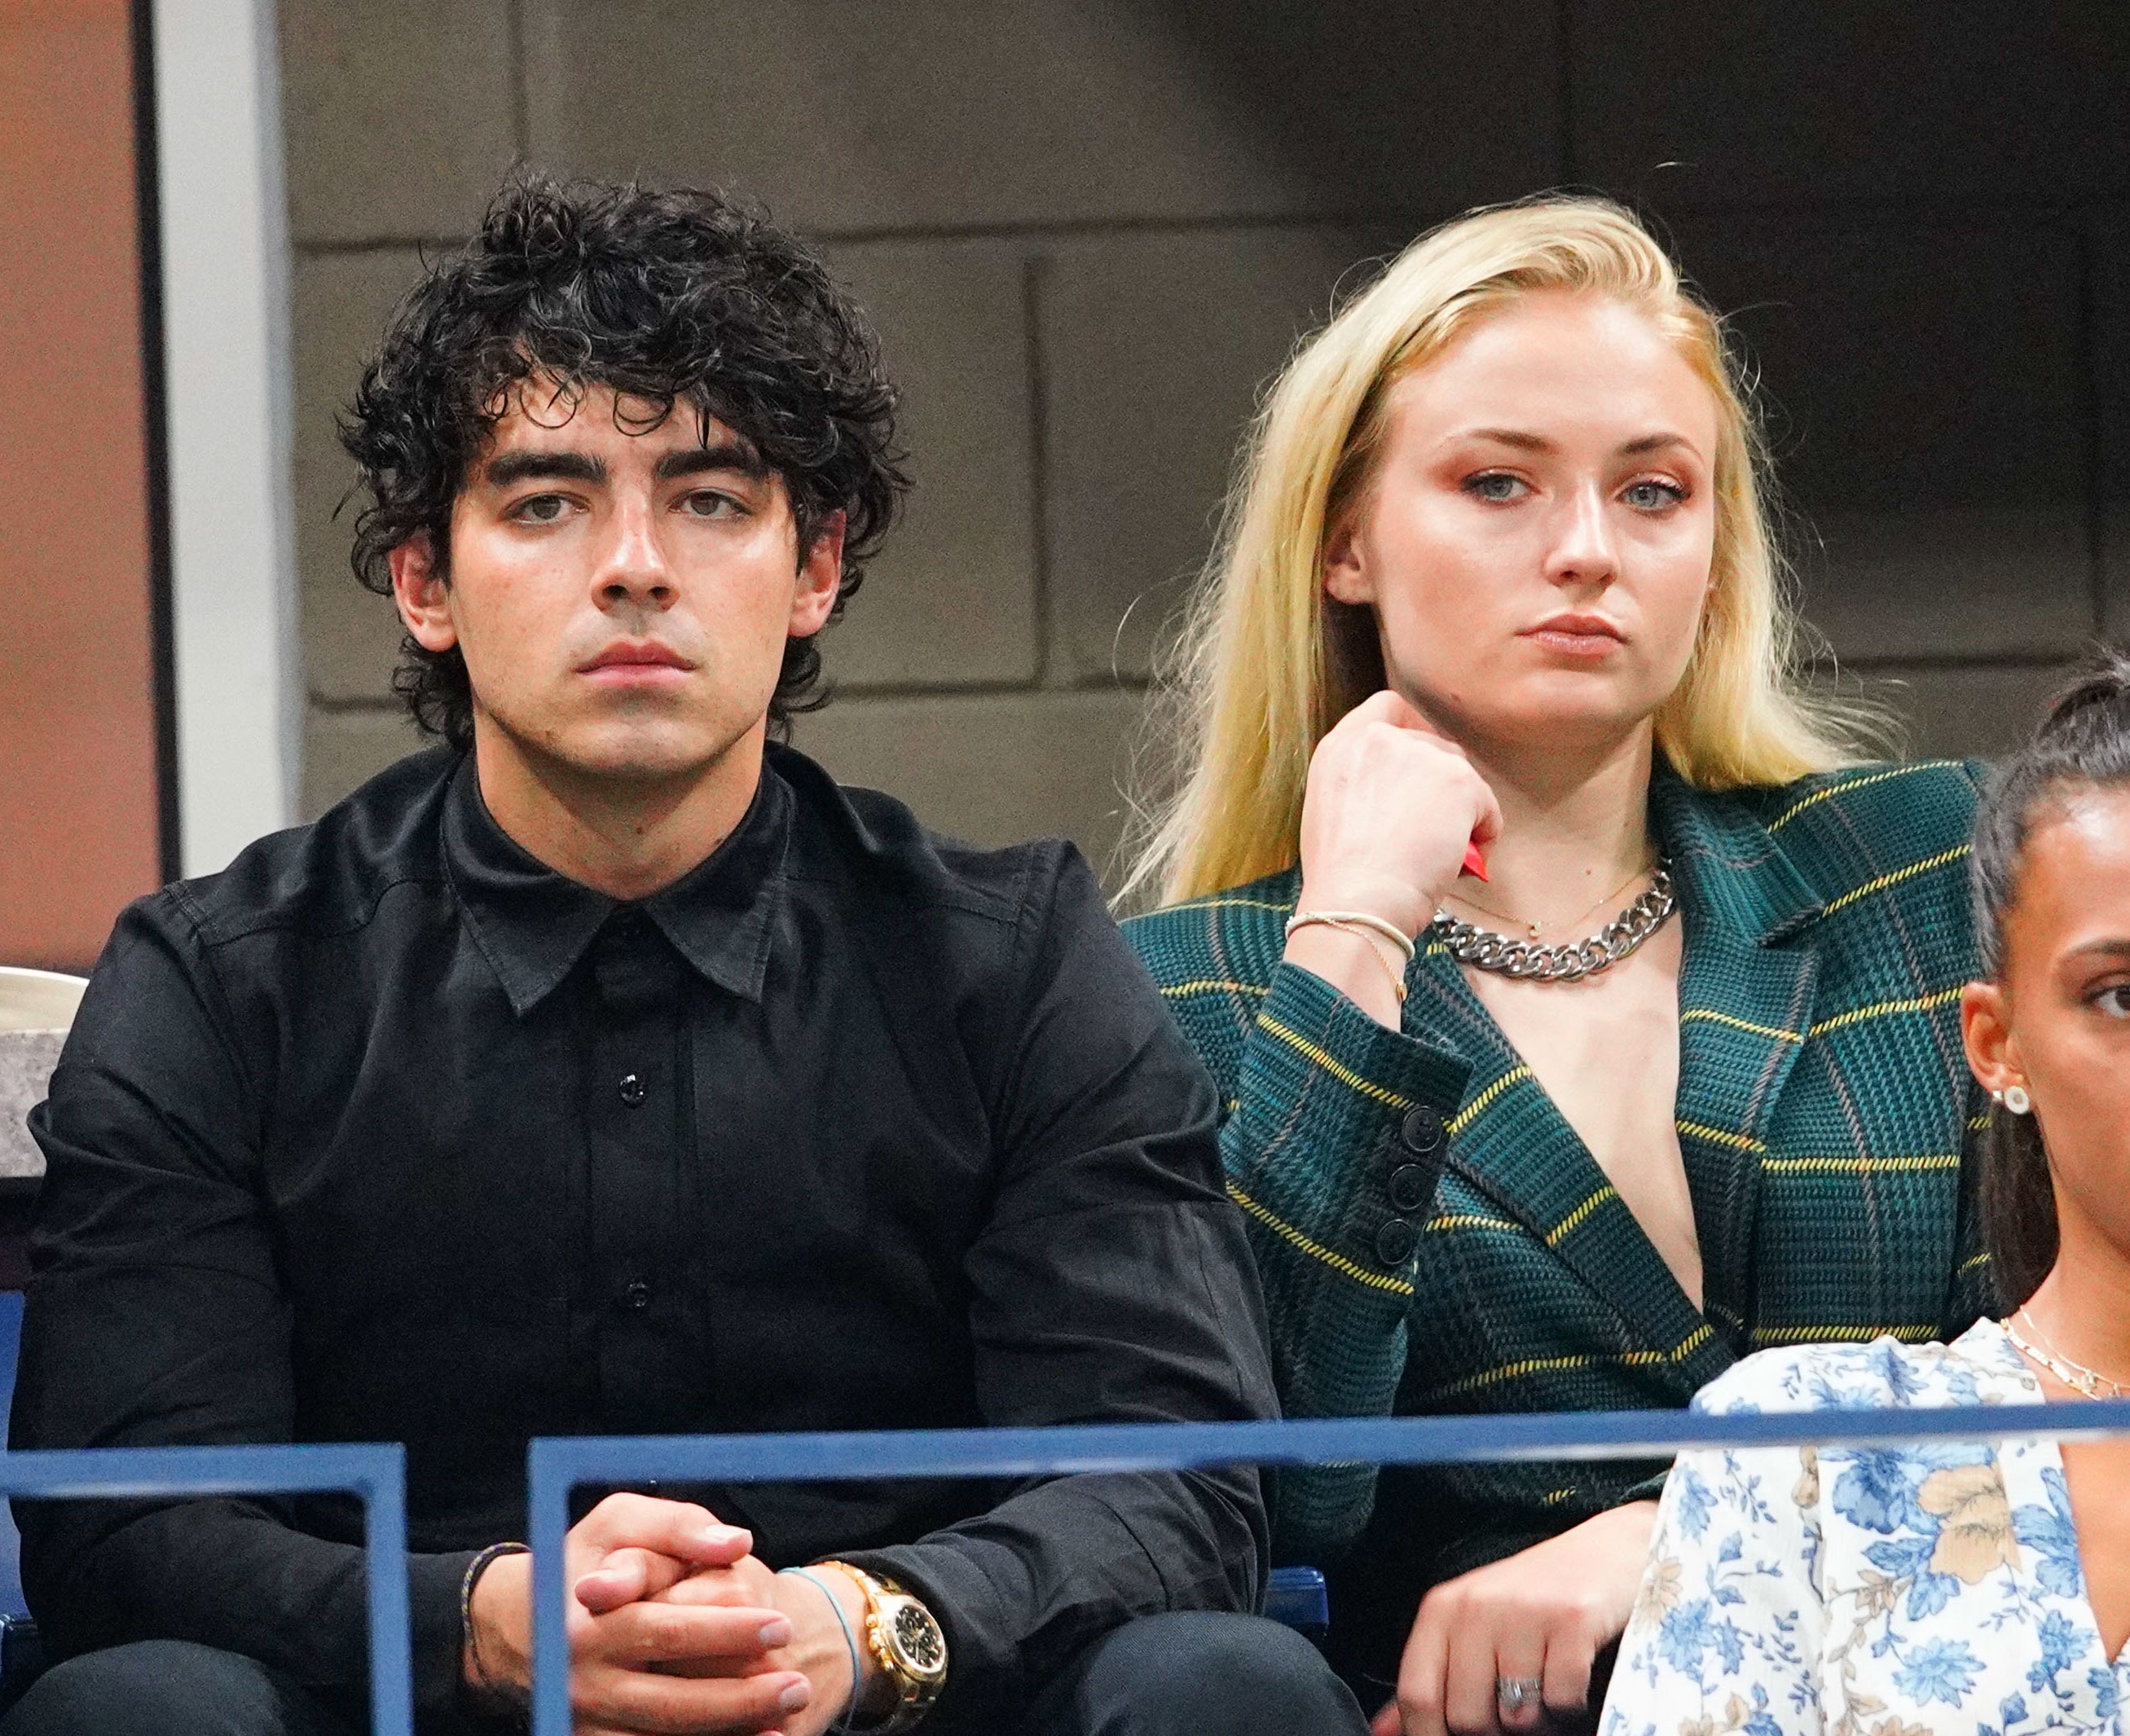 Close-up of Joe and Sophie sitting together in an audience